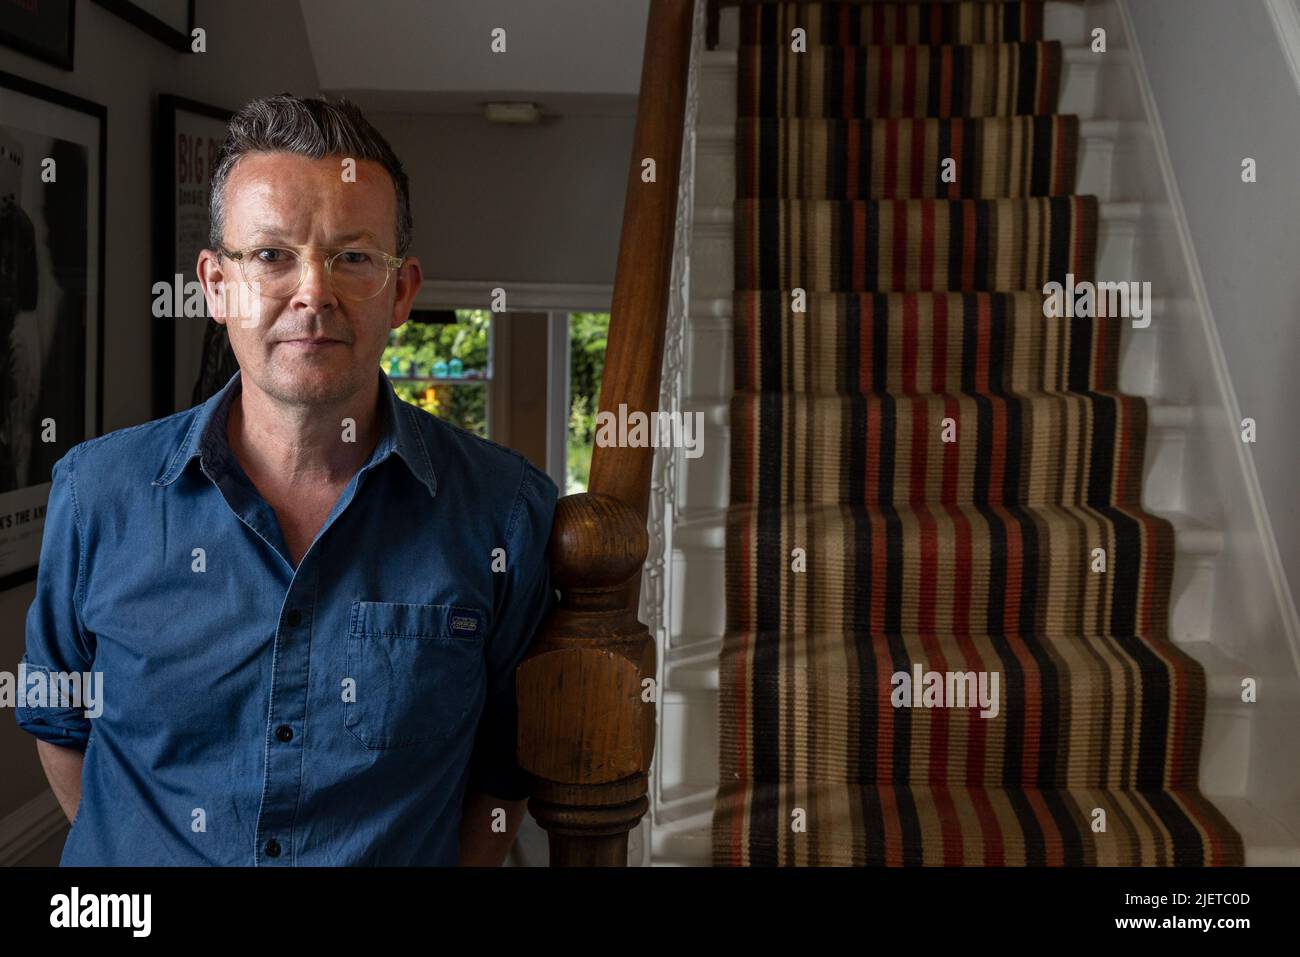 Enda Walsh, Playwright, photographed at his home in Kilburn, London Plays include Disco Pigs and The Walworth Farce. Stock Photo